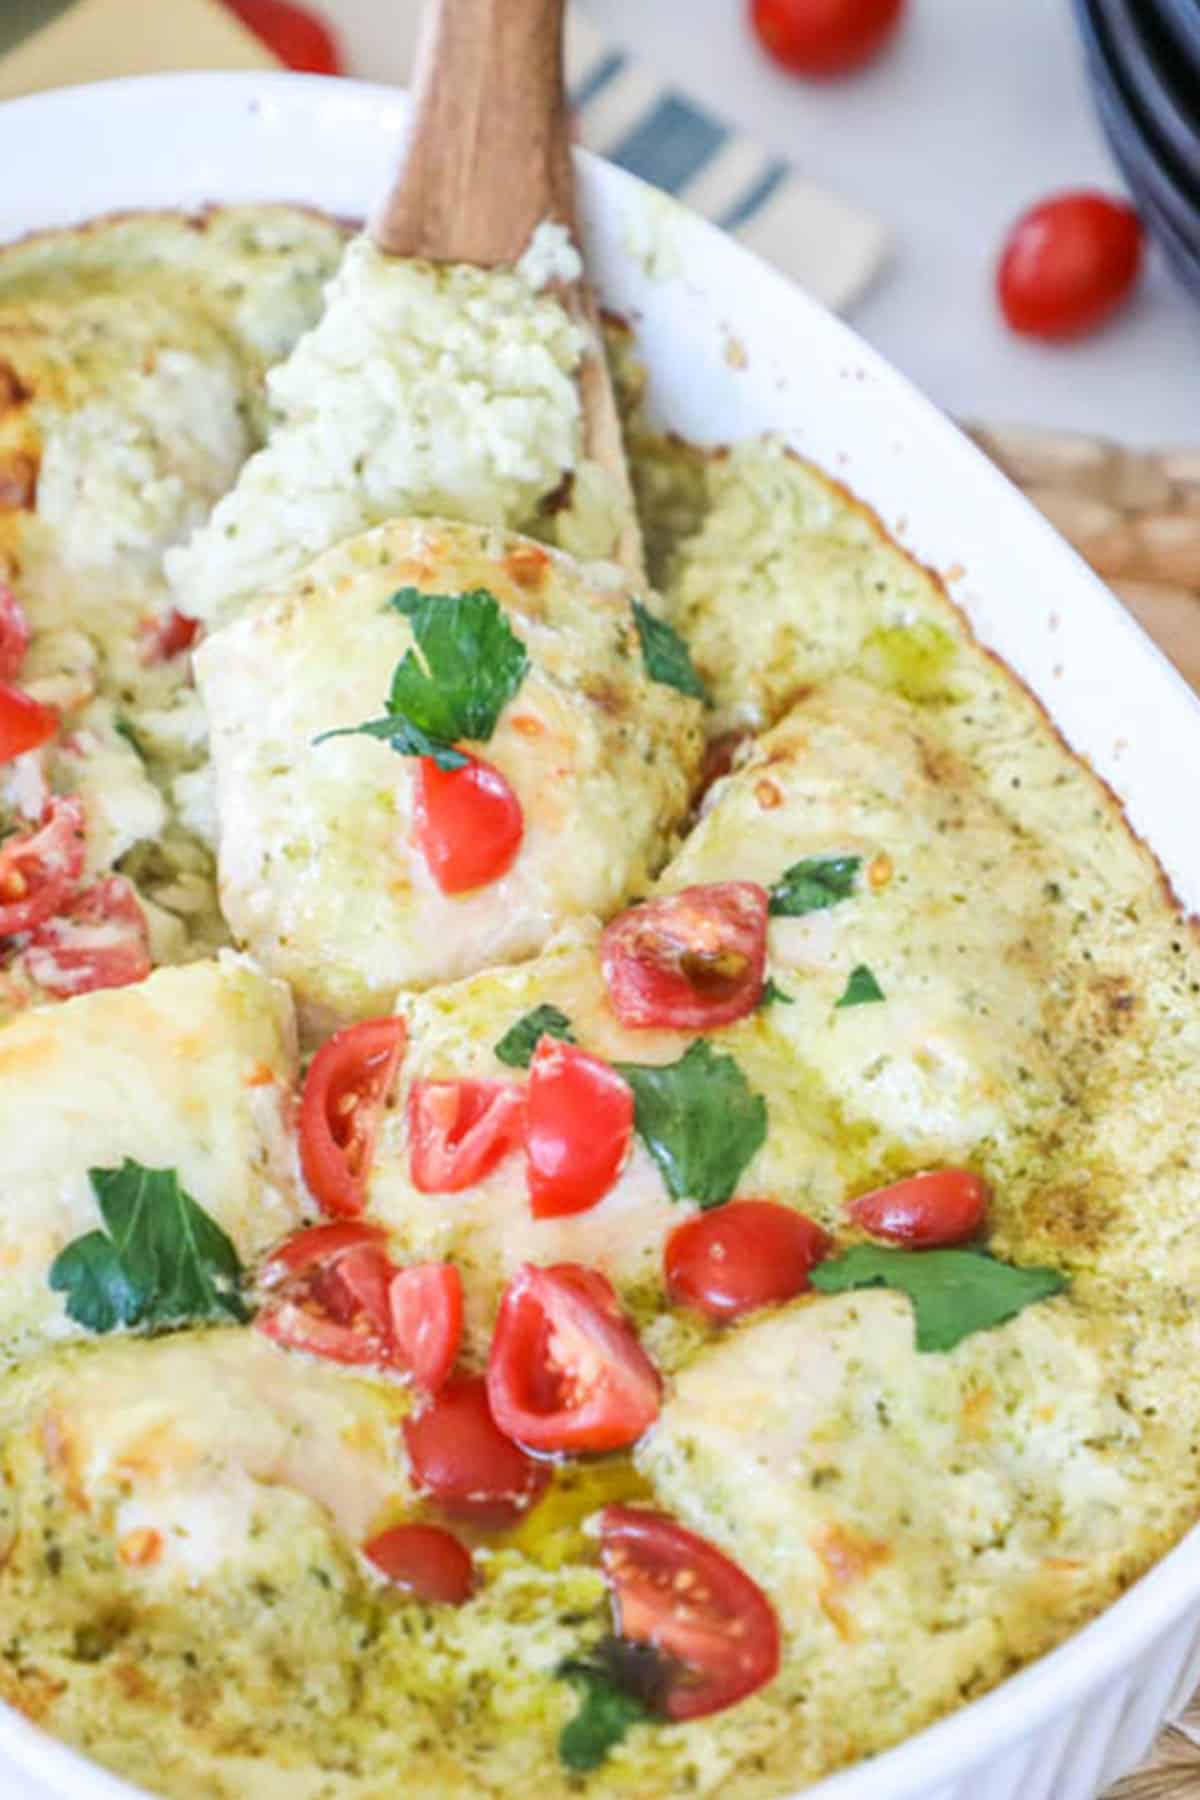 pesto chicken casserole with basil and tomatoes as a garish